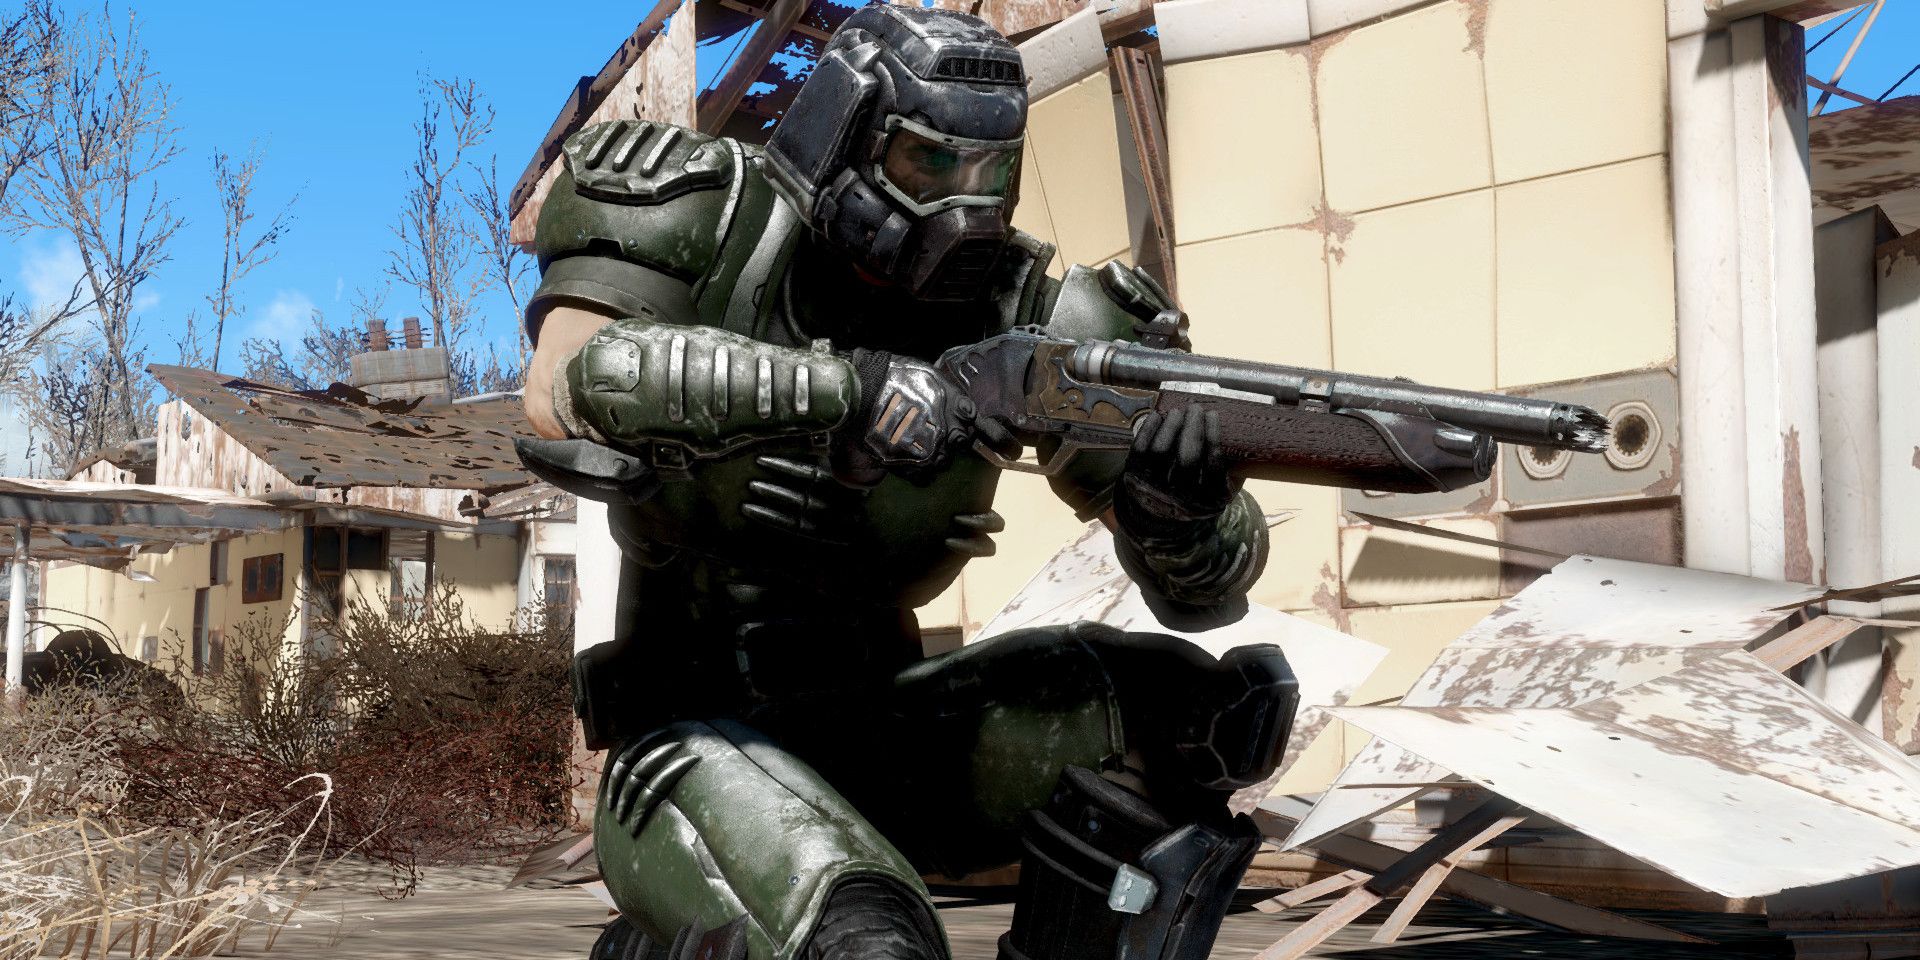 Fallout 4 Mod Of Doom Guy's Armor Created By AthenaX